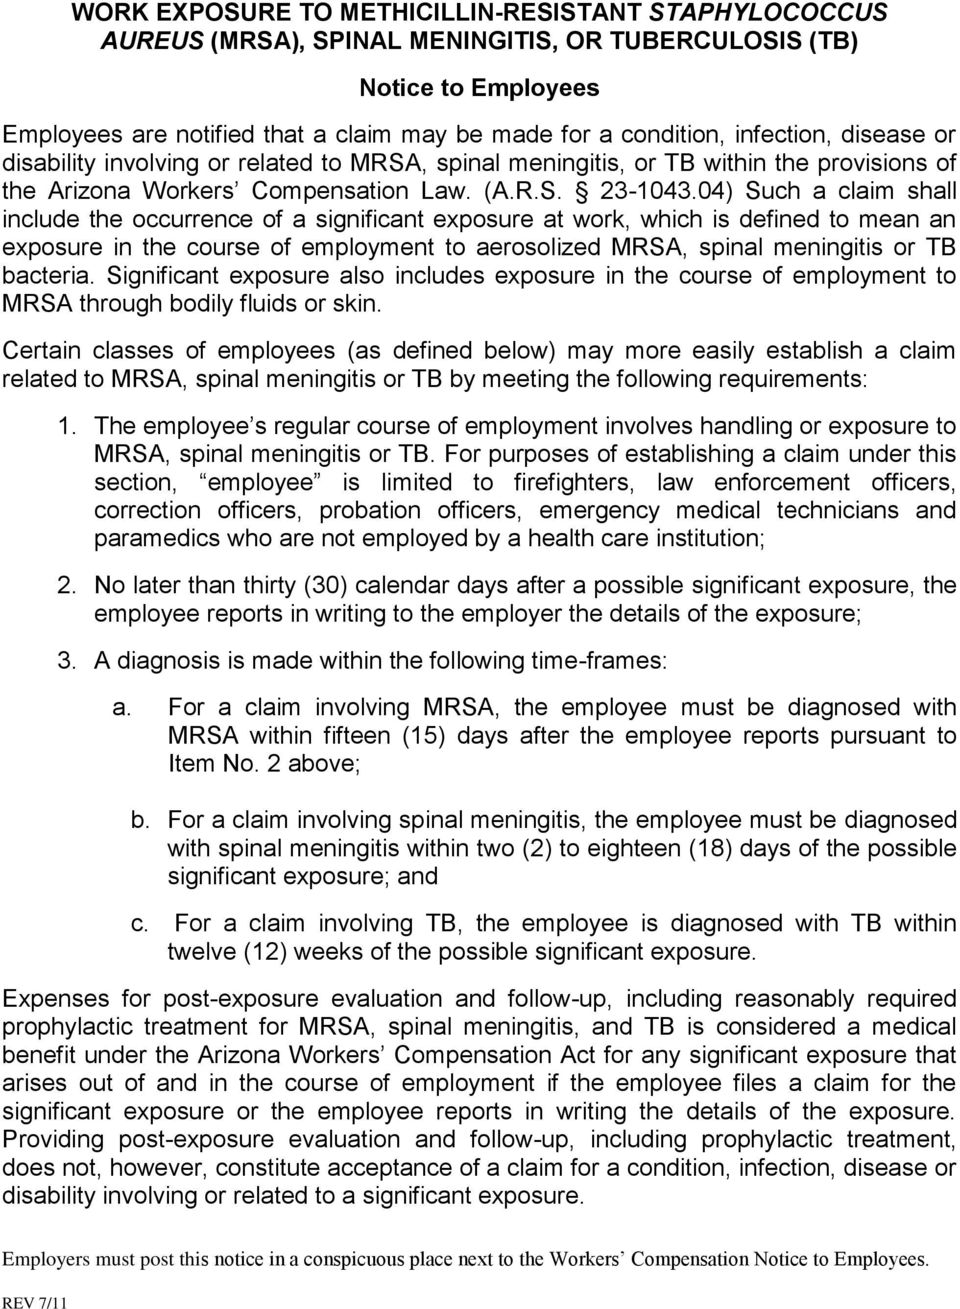 04) Such a claim shall include the occurrence of a significant exposure at work, which is defined to mean an exposure in the course of employment to aerosolized MRSA, spinal meningitis or TB bacteria.